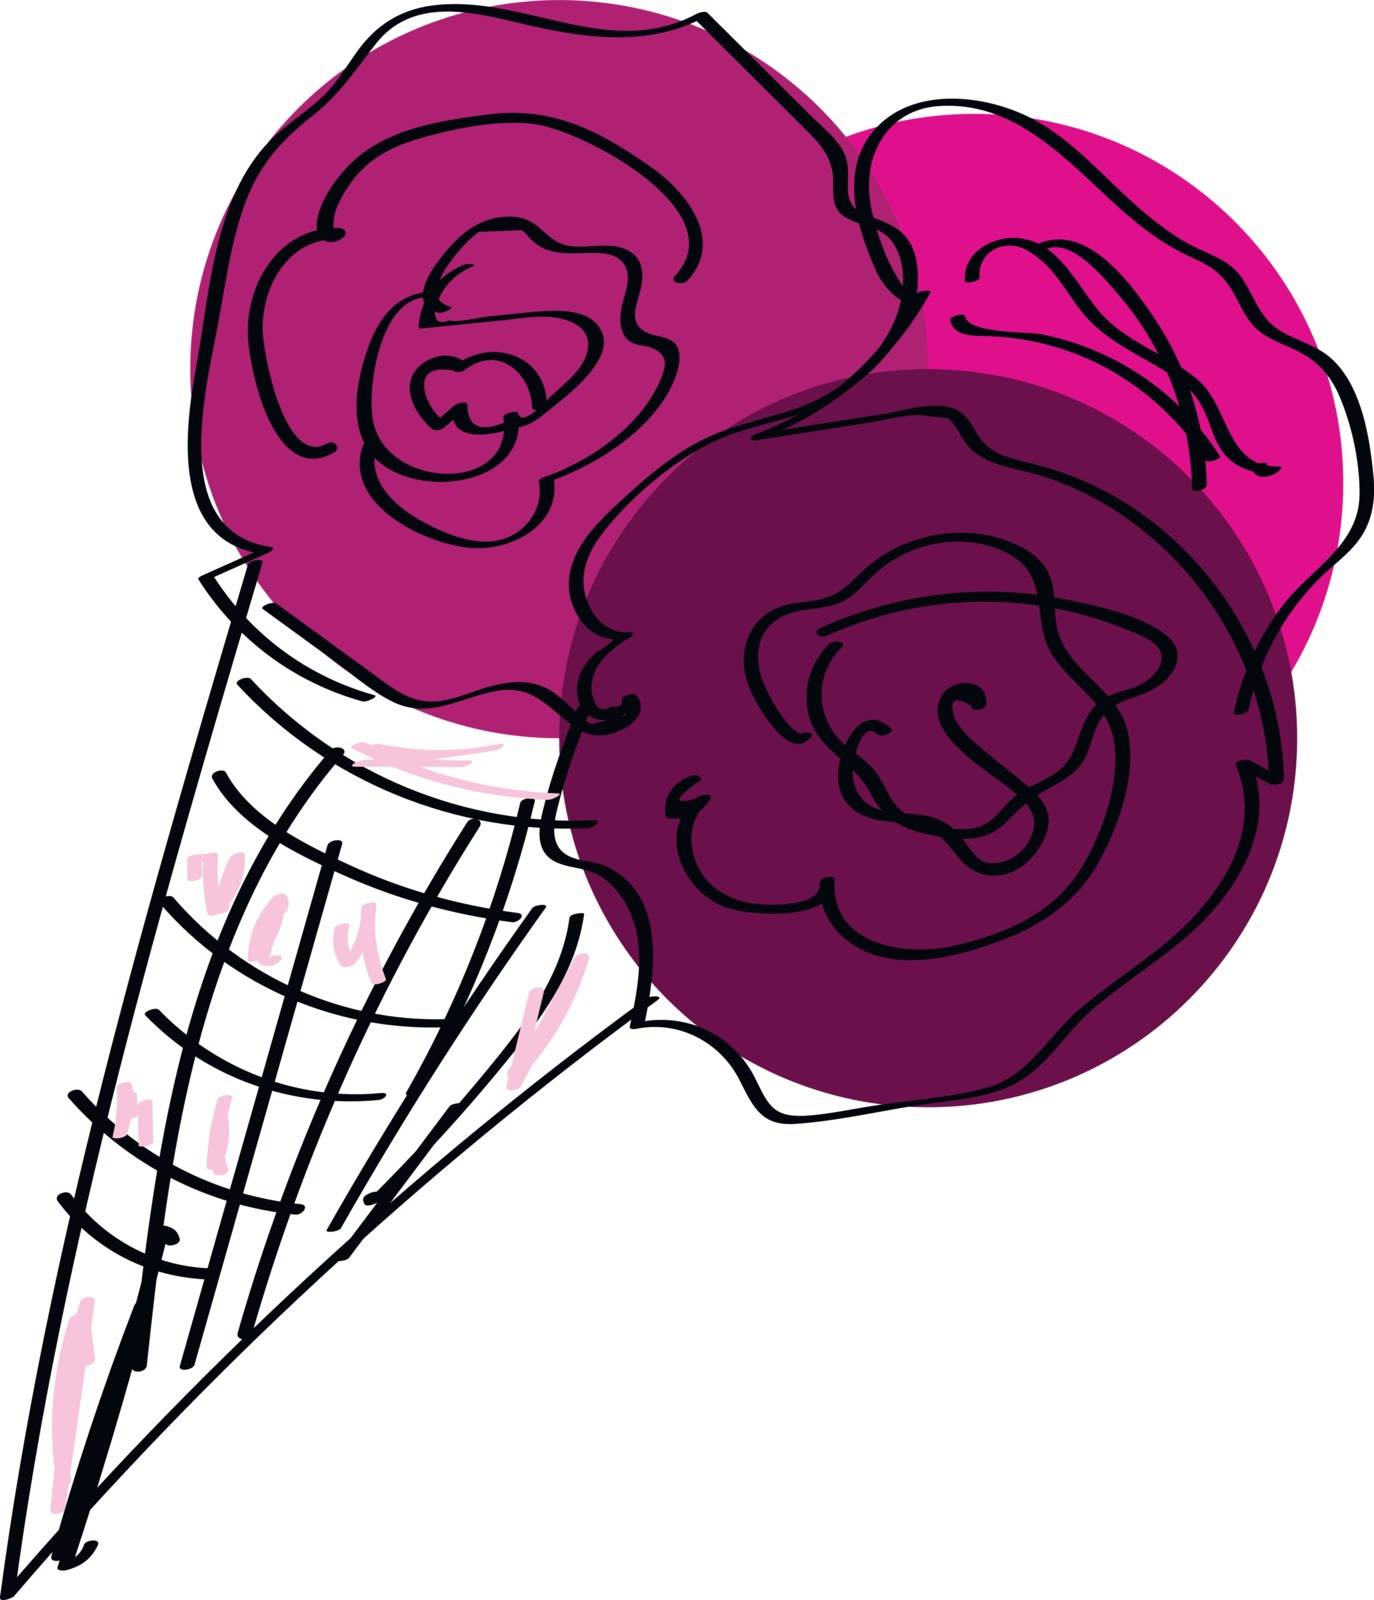 A thin crisp edible cone holds the filling and topped with whole red berries is yummy and delicious  vector  color drawing or illustration